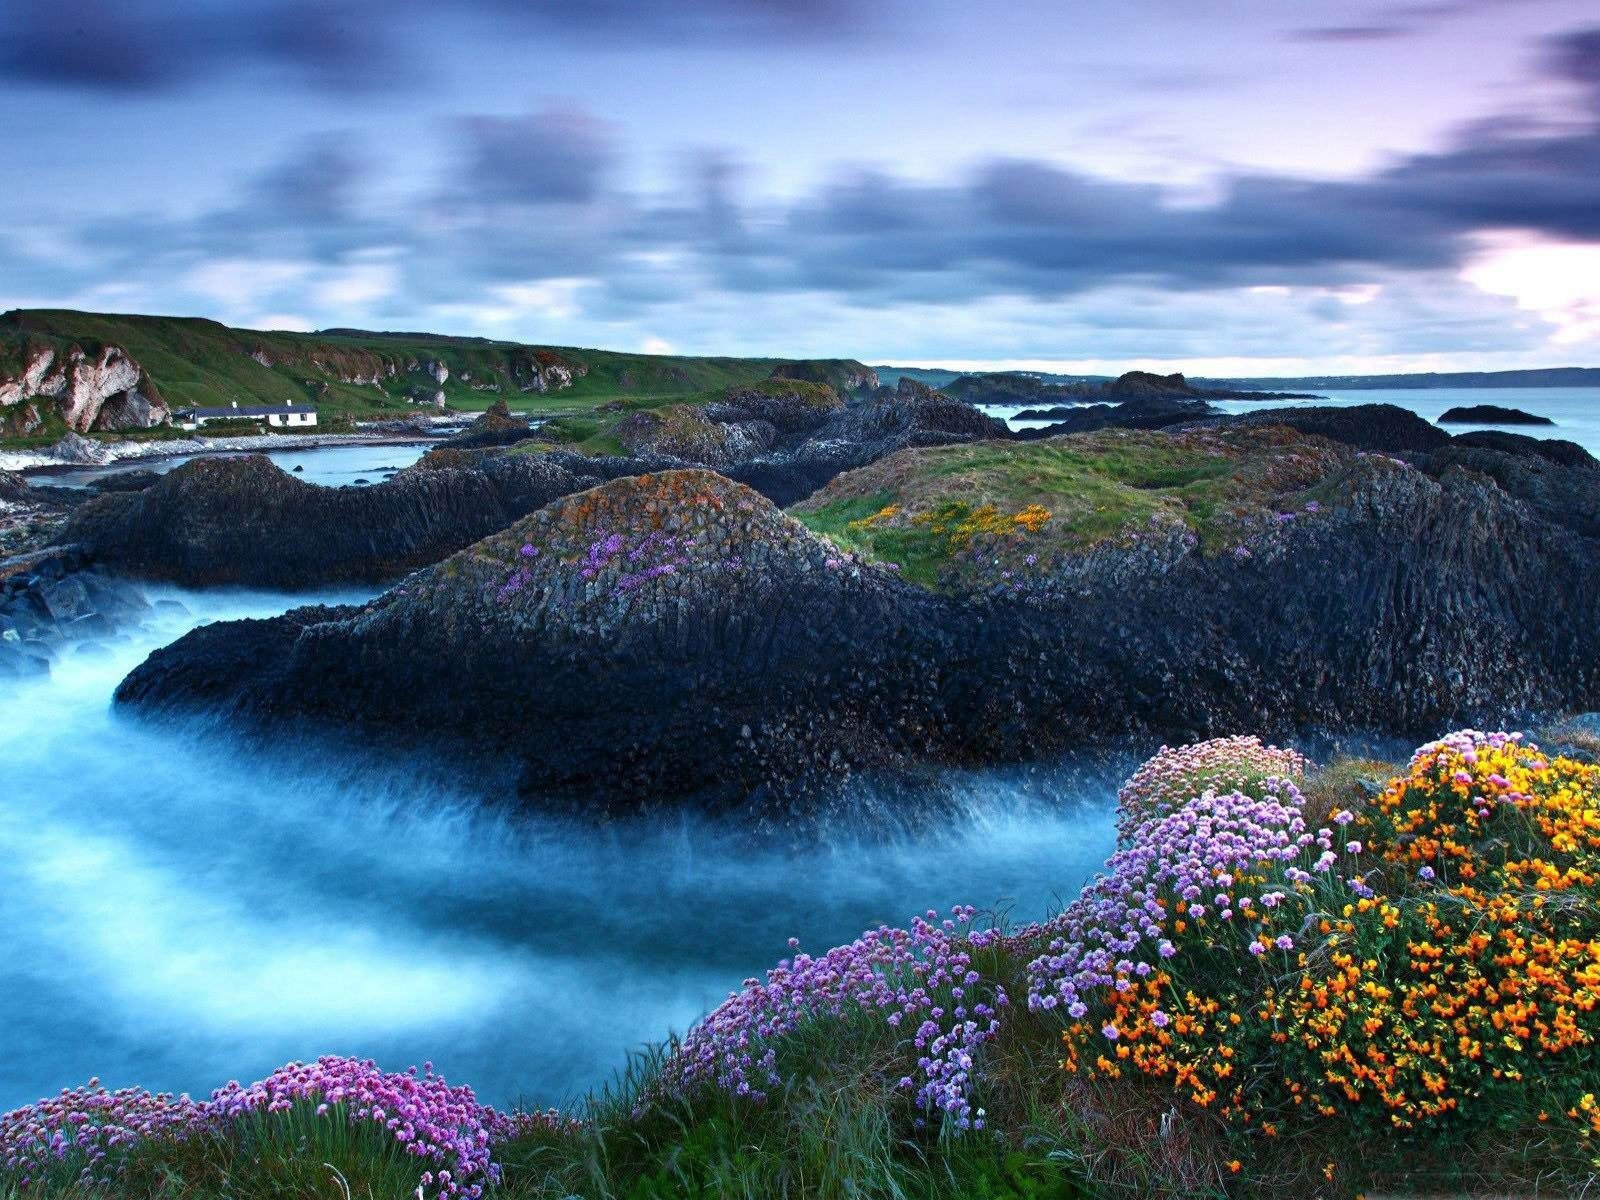 Arrival Of Spring Nature Landscape Coast Sea Mountains With Spring Meadow Flowers In Various Colors Sky With Gray Clouds Wallpaper HD 1920x1200, Wallpaper13.com